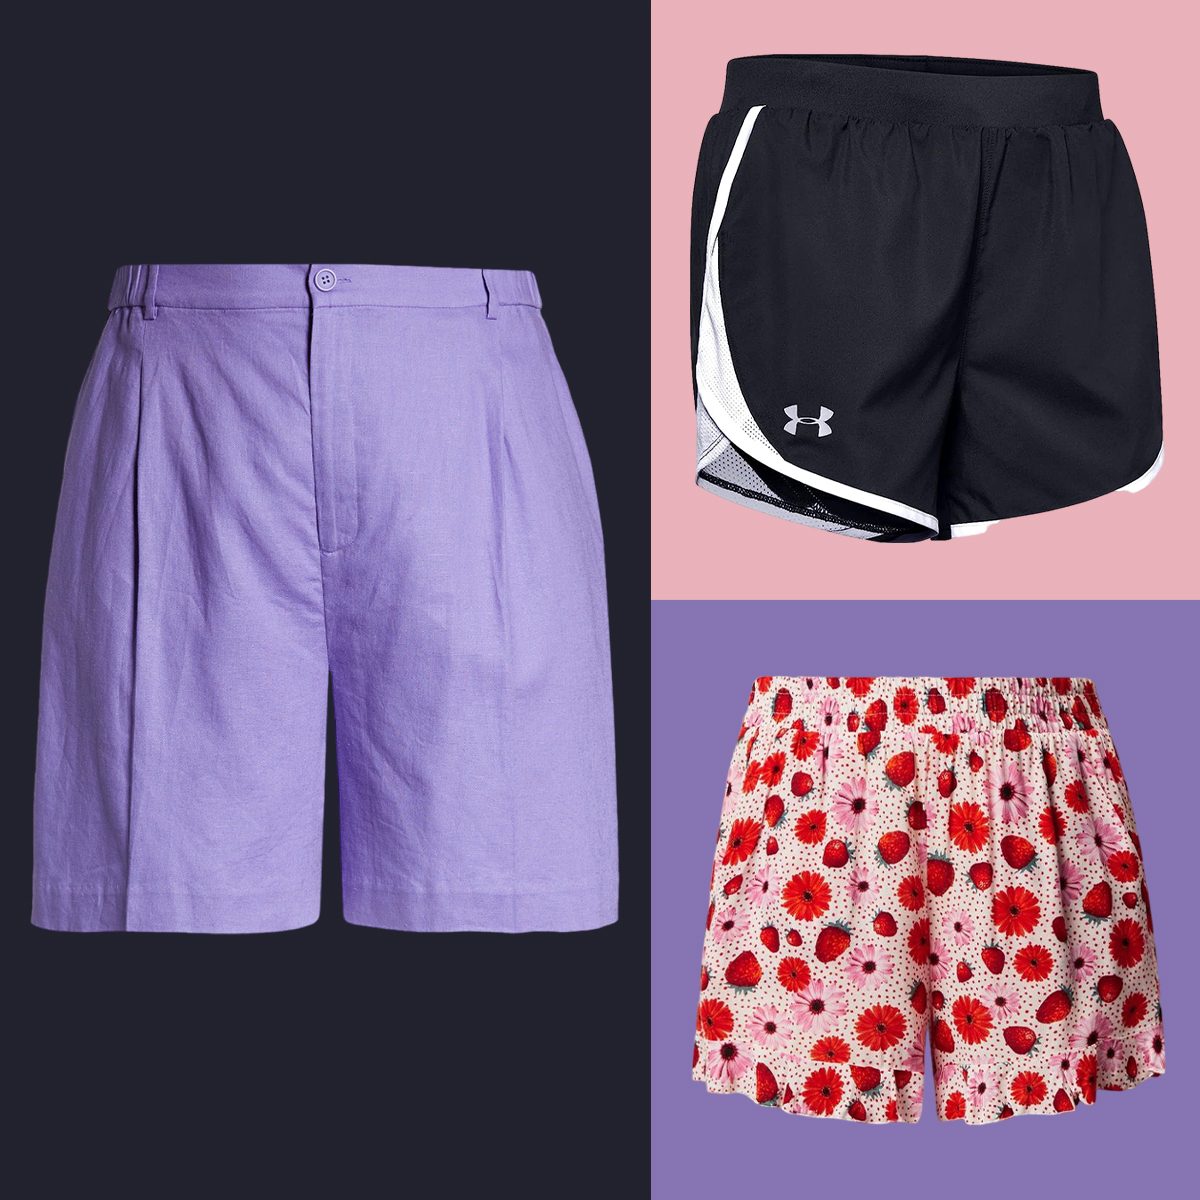 Plus Size Shorts - The Perfect Solution for a Hot Summer